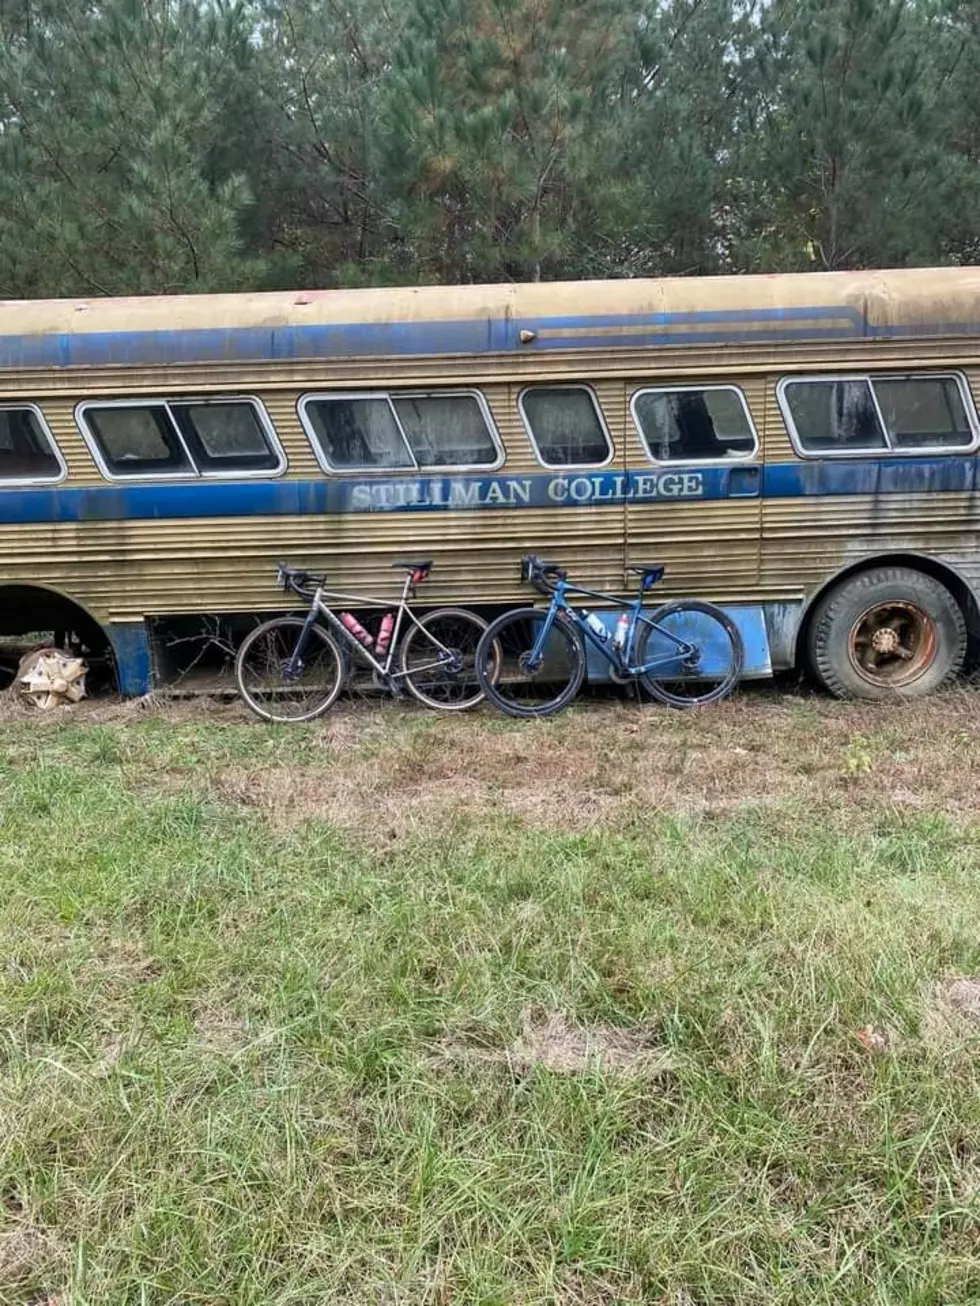 Old Stillman College Bus Discovered During Bike Ride